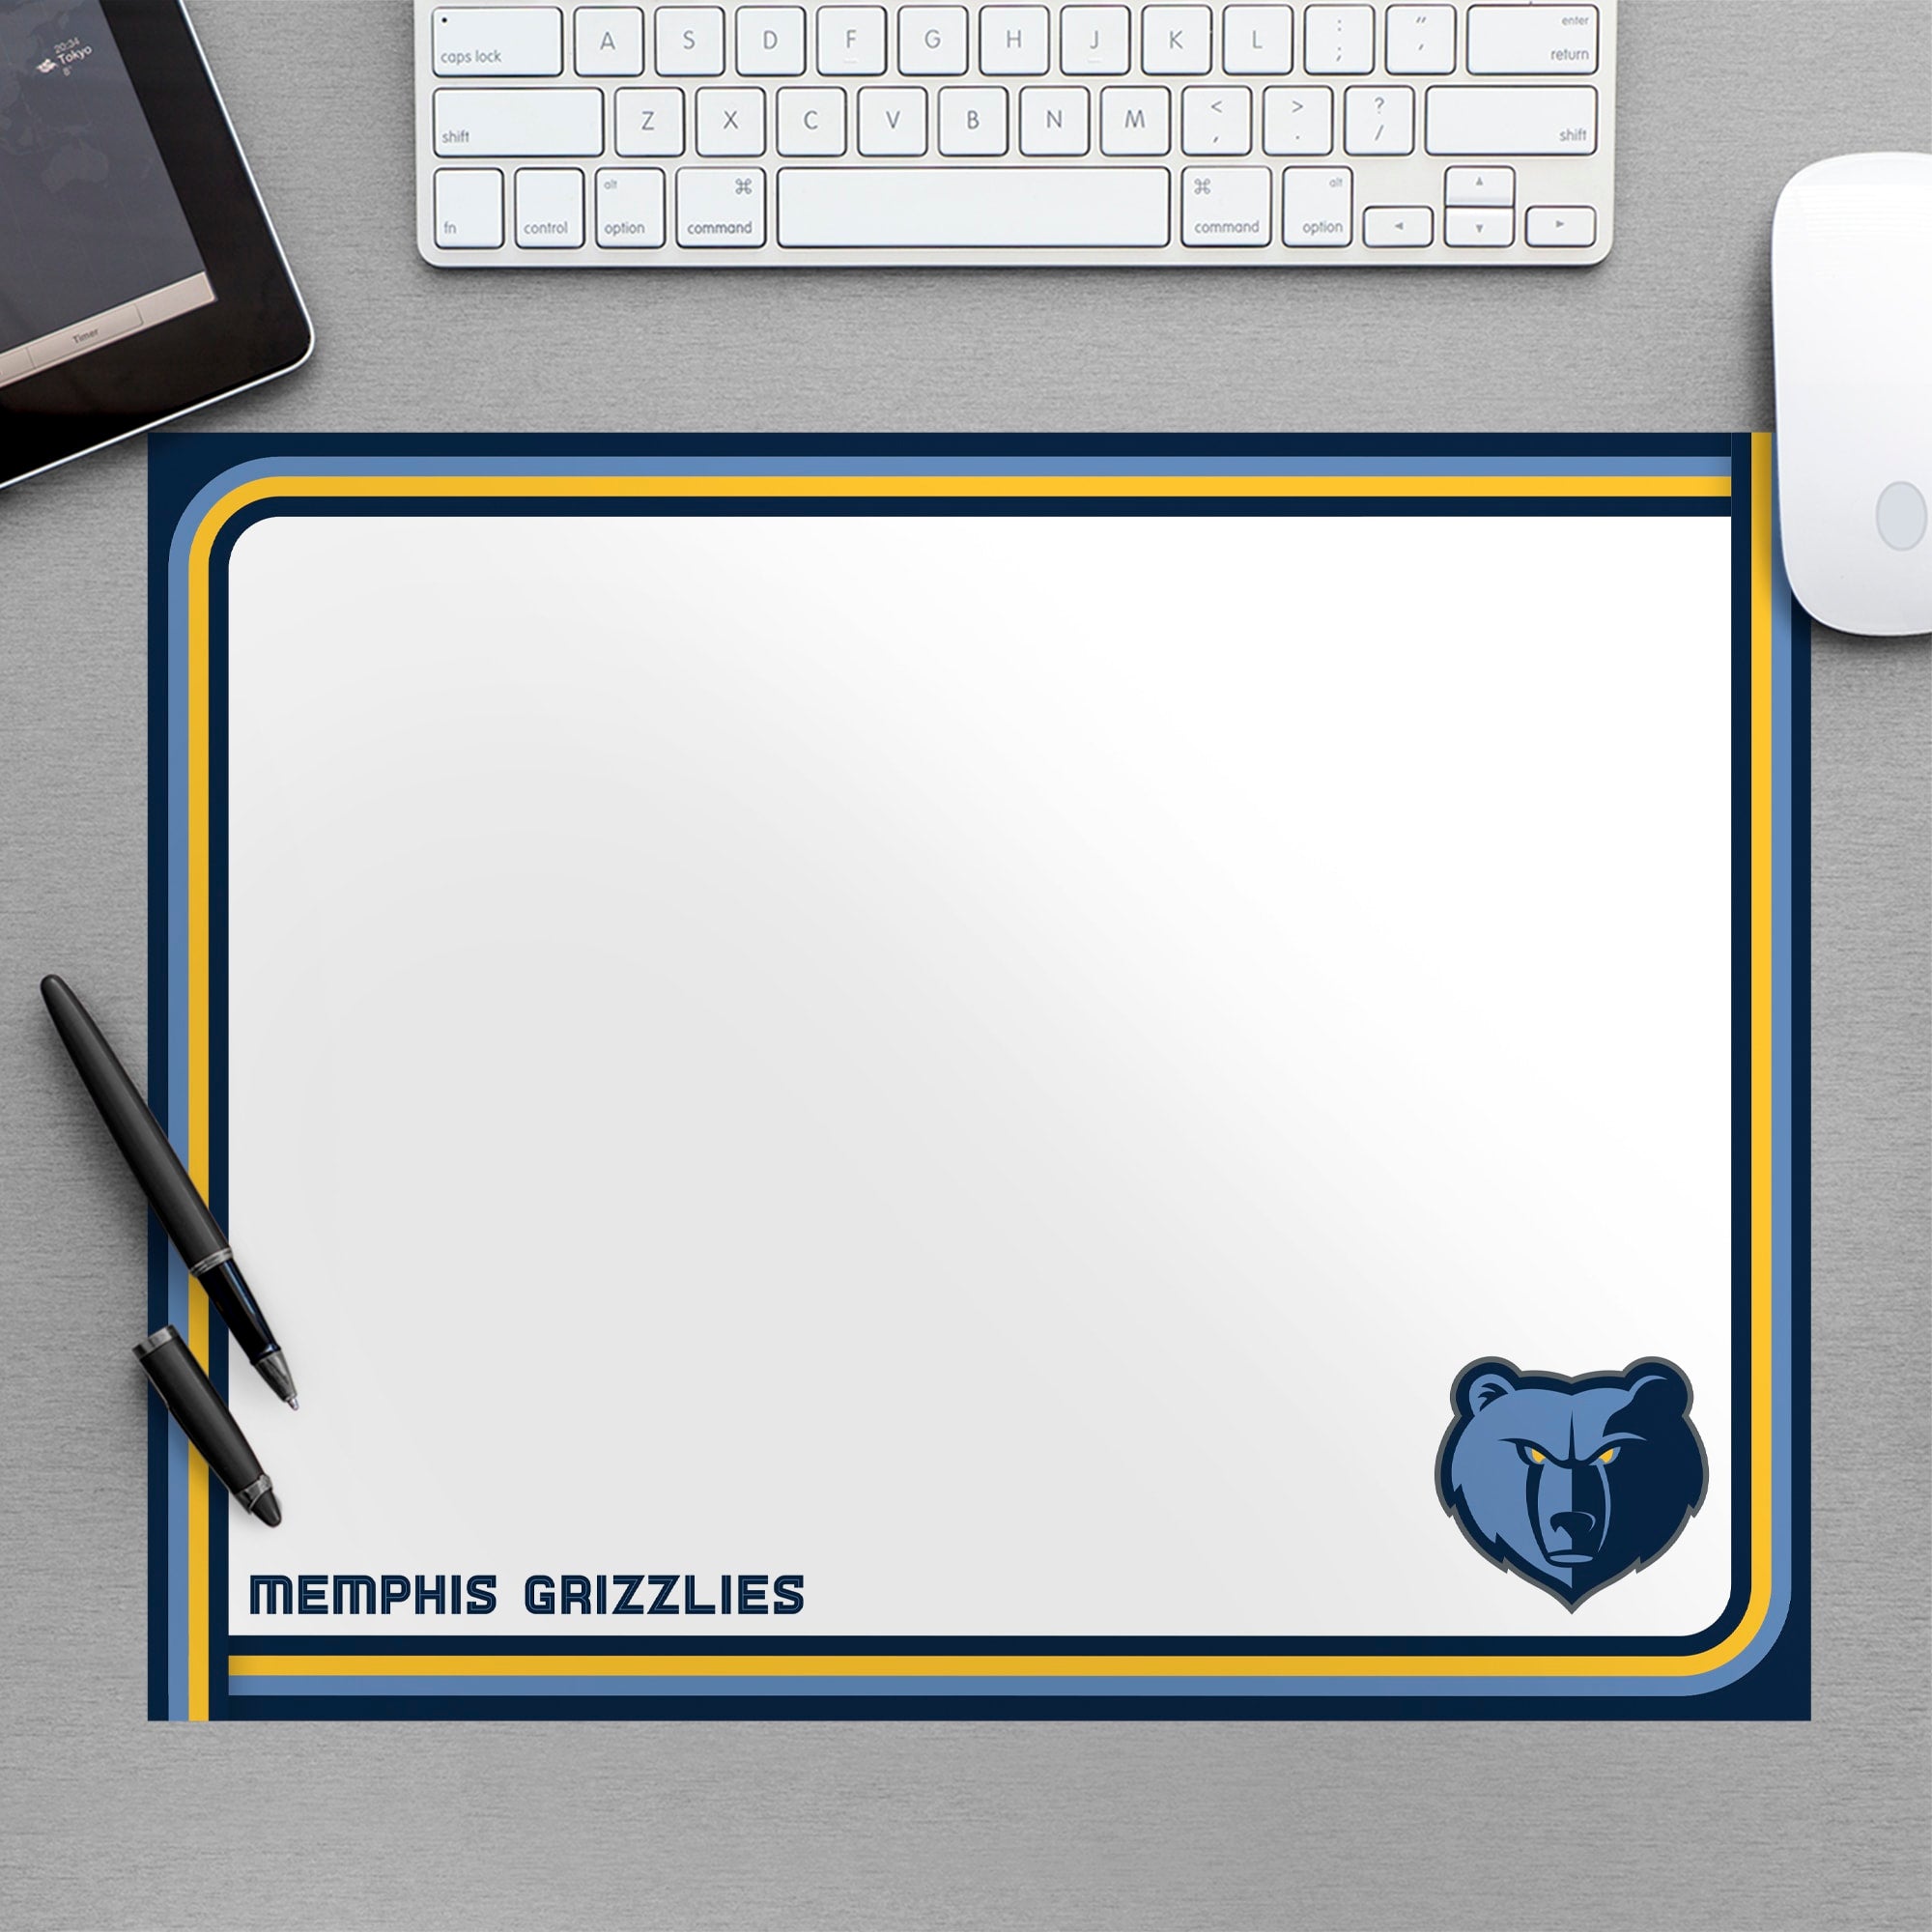 Memphis Grizzlies for Memphis Grizzlies: Dry Erase Whiteboard - Officially Licensed NBA Removable Wall Decal Large by Fathead |